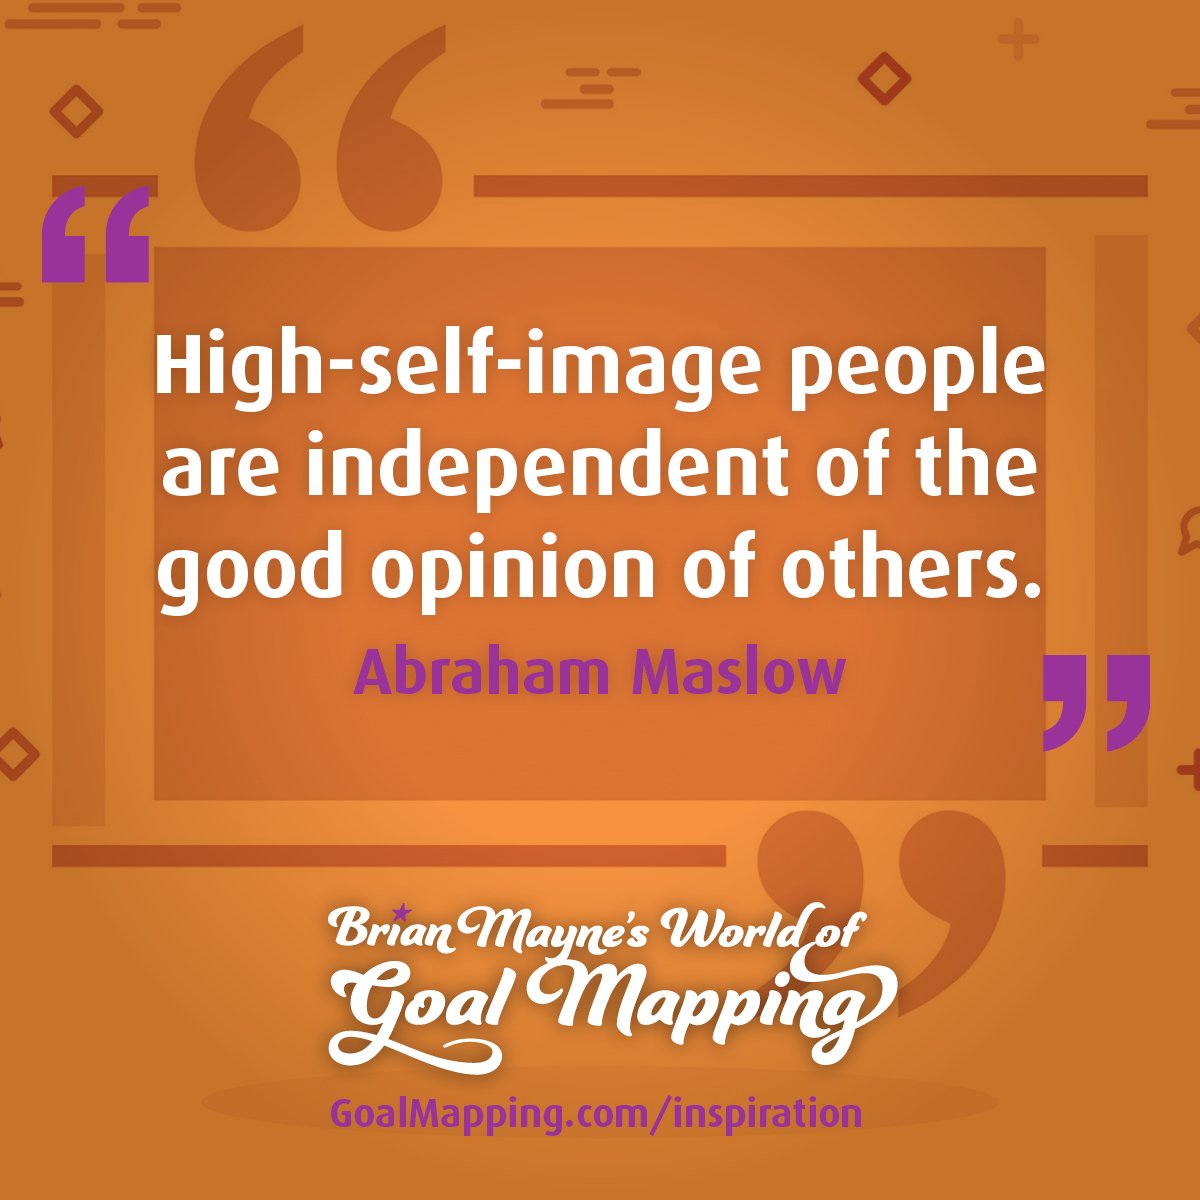 "High-self-image people are independent of the good opinion of others." Abraham Maslow